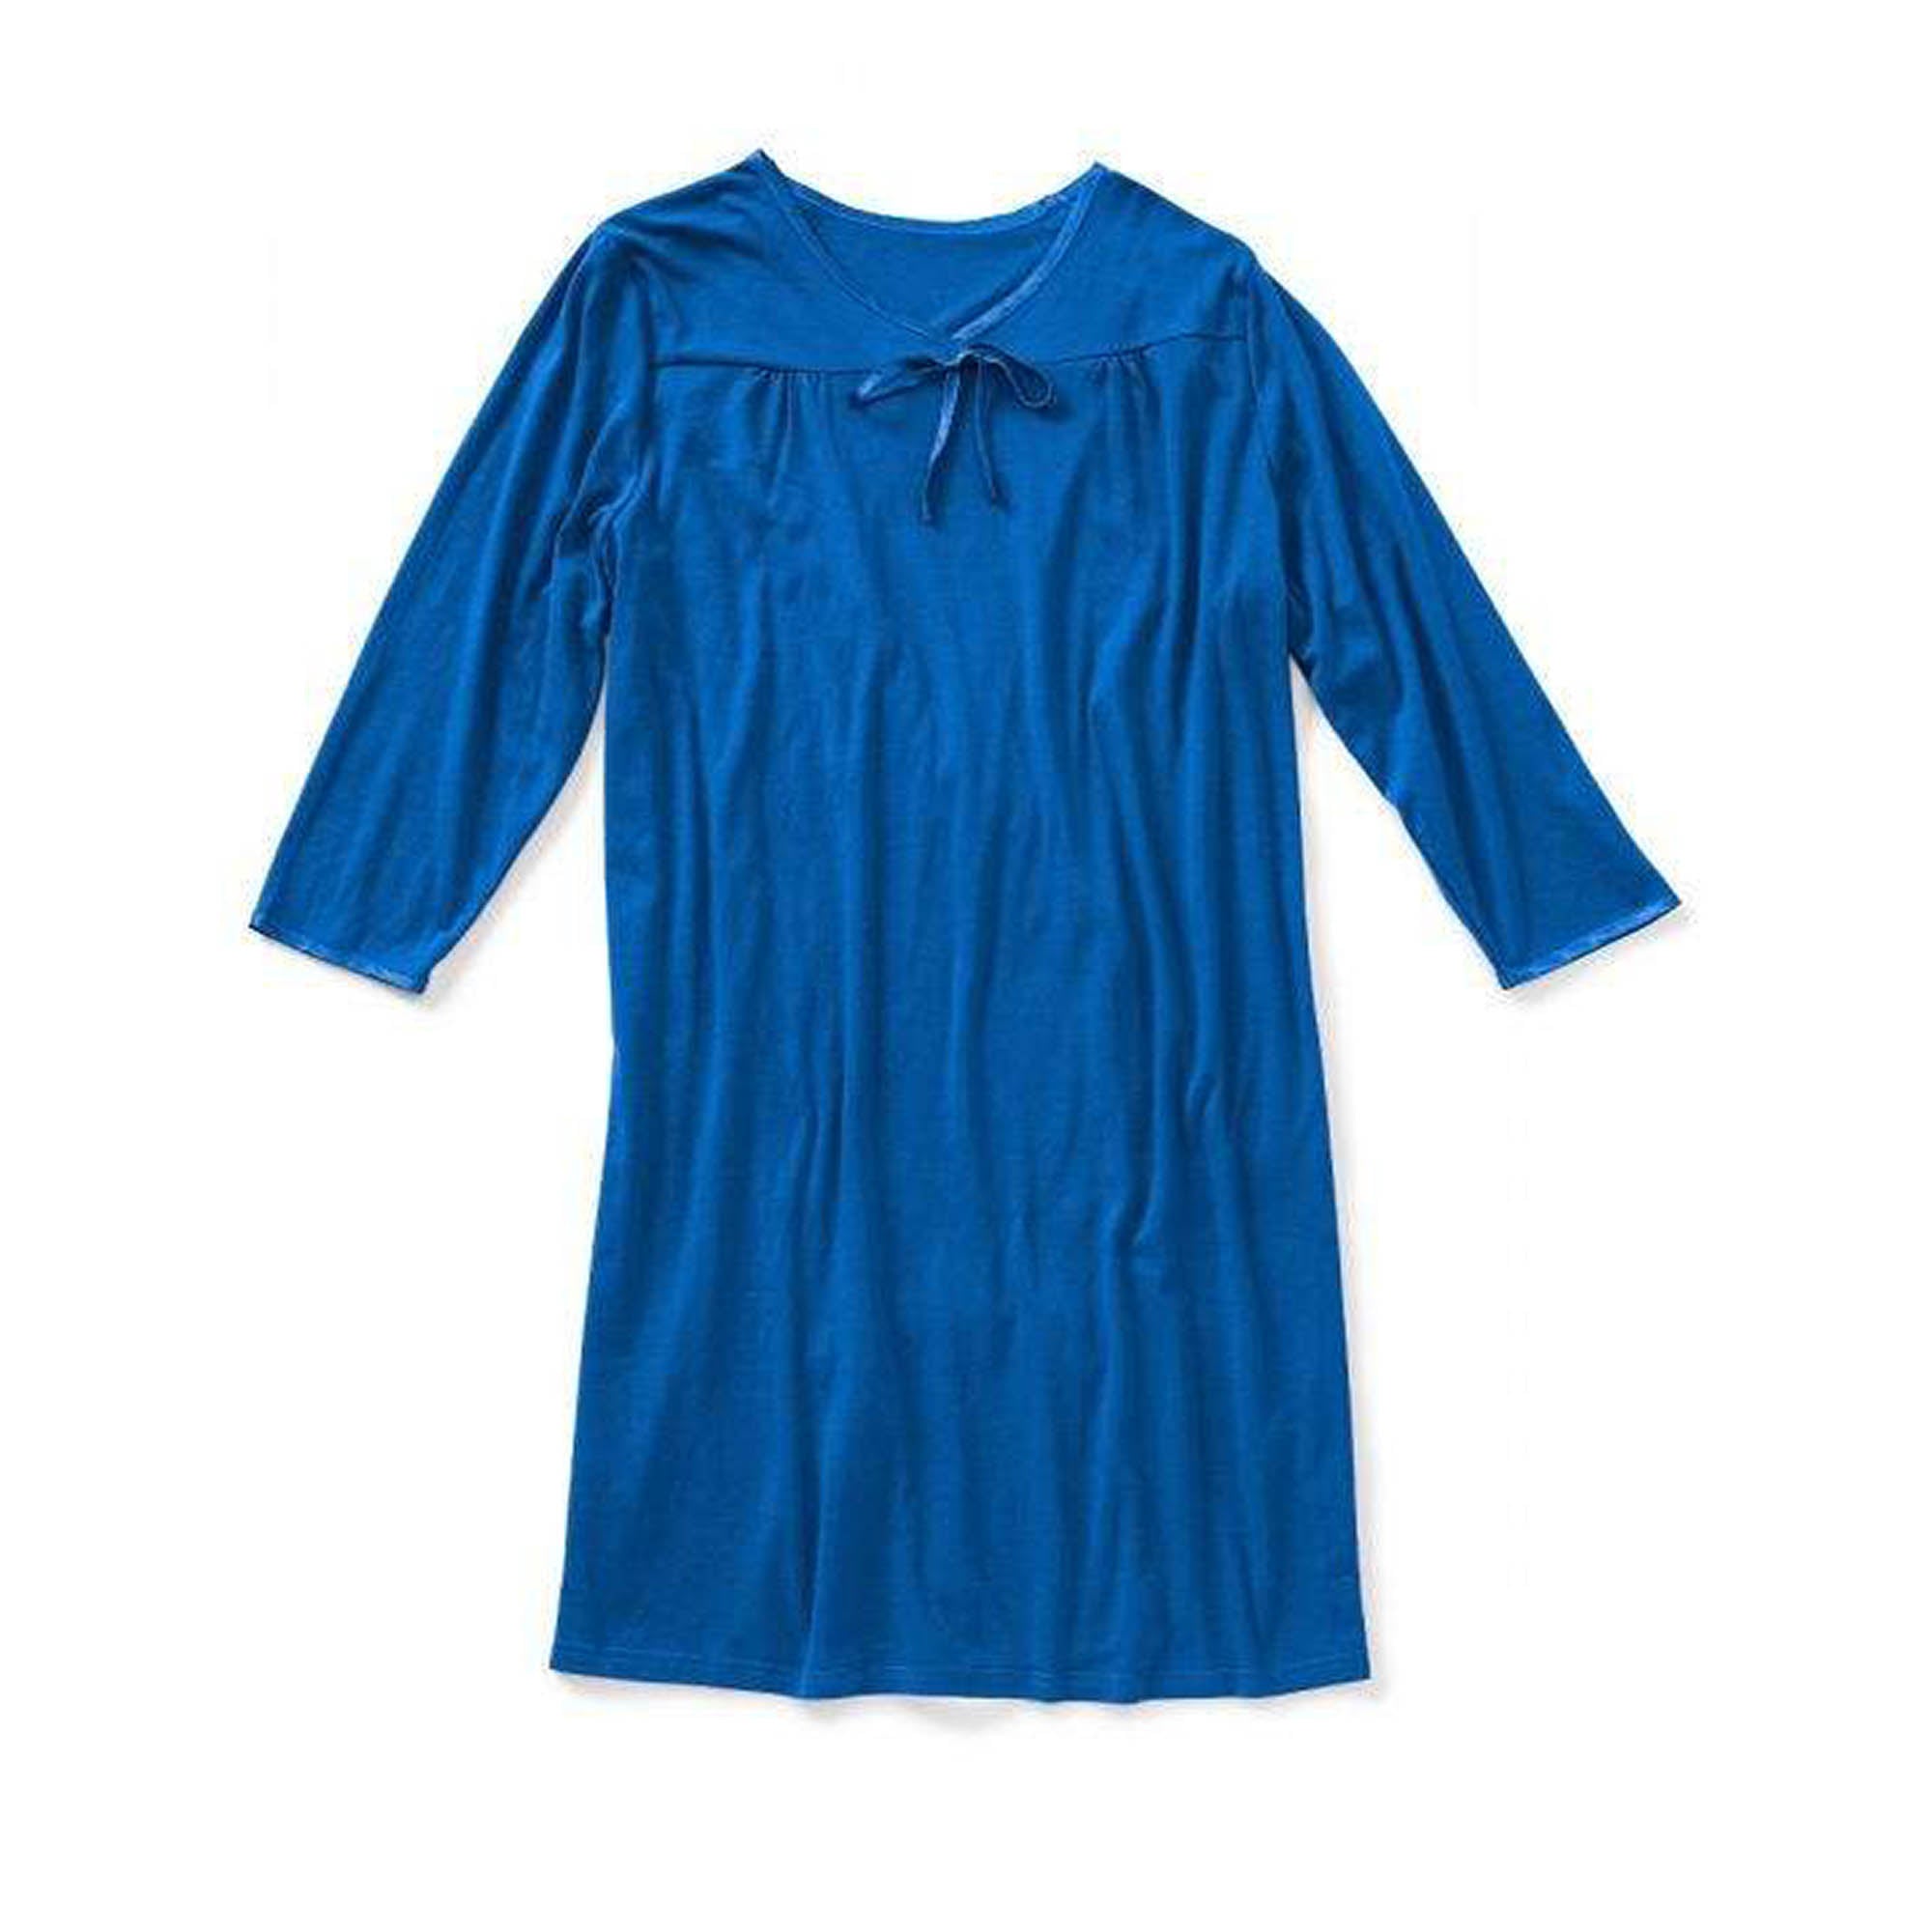 Silverts Women's Open Back Antimicrobial Long-sleeve Nightgown - Adaptive Clothing - Blue - S